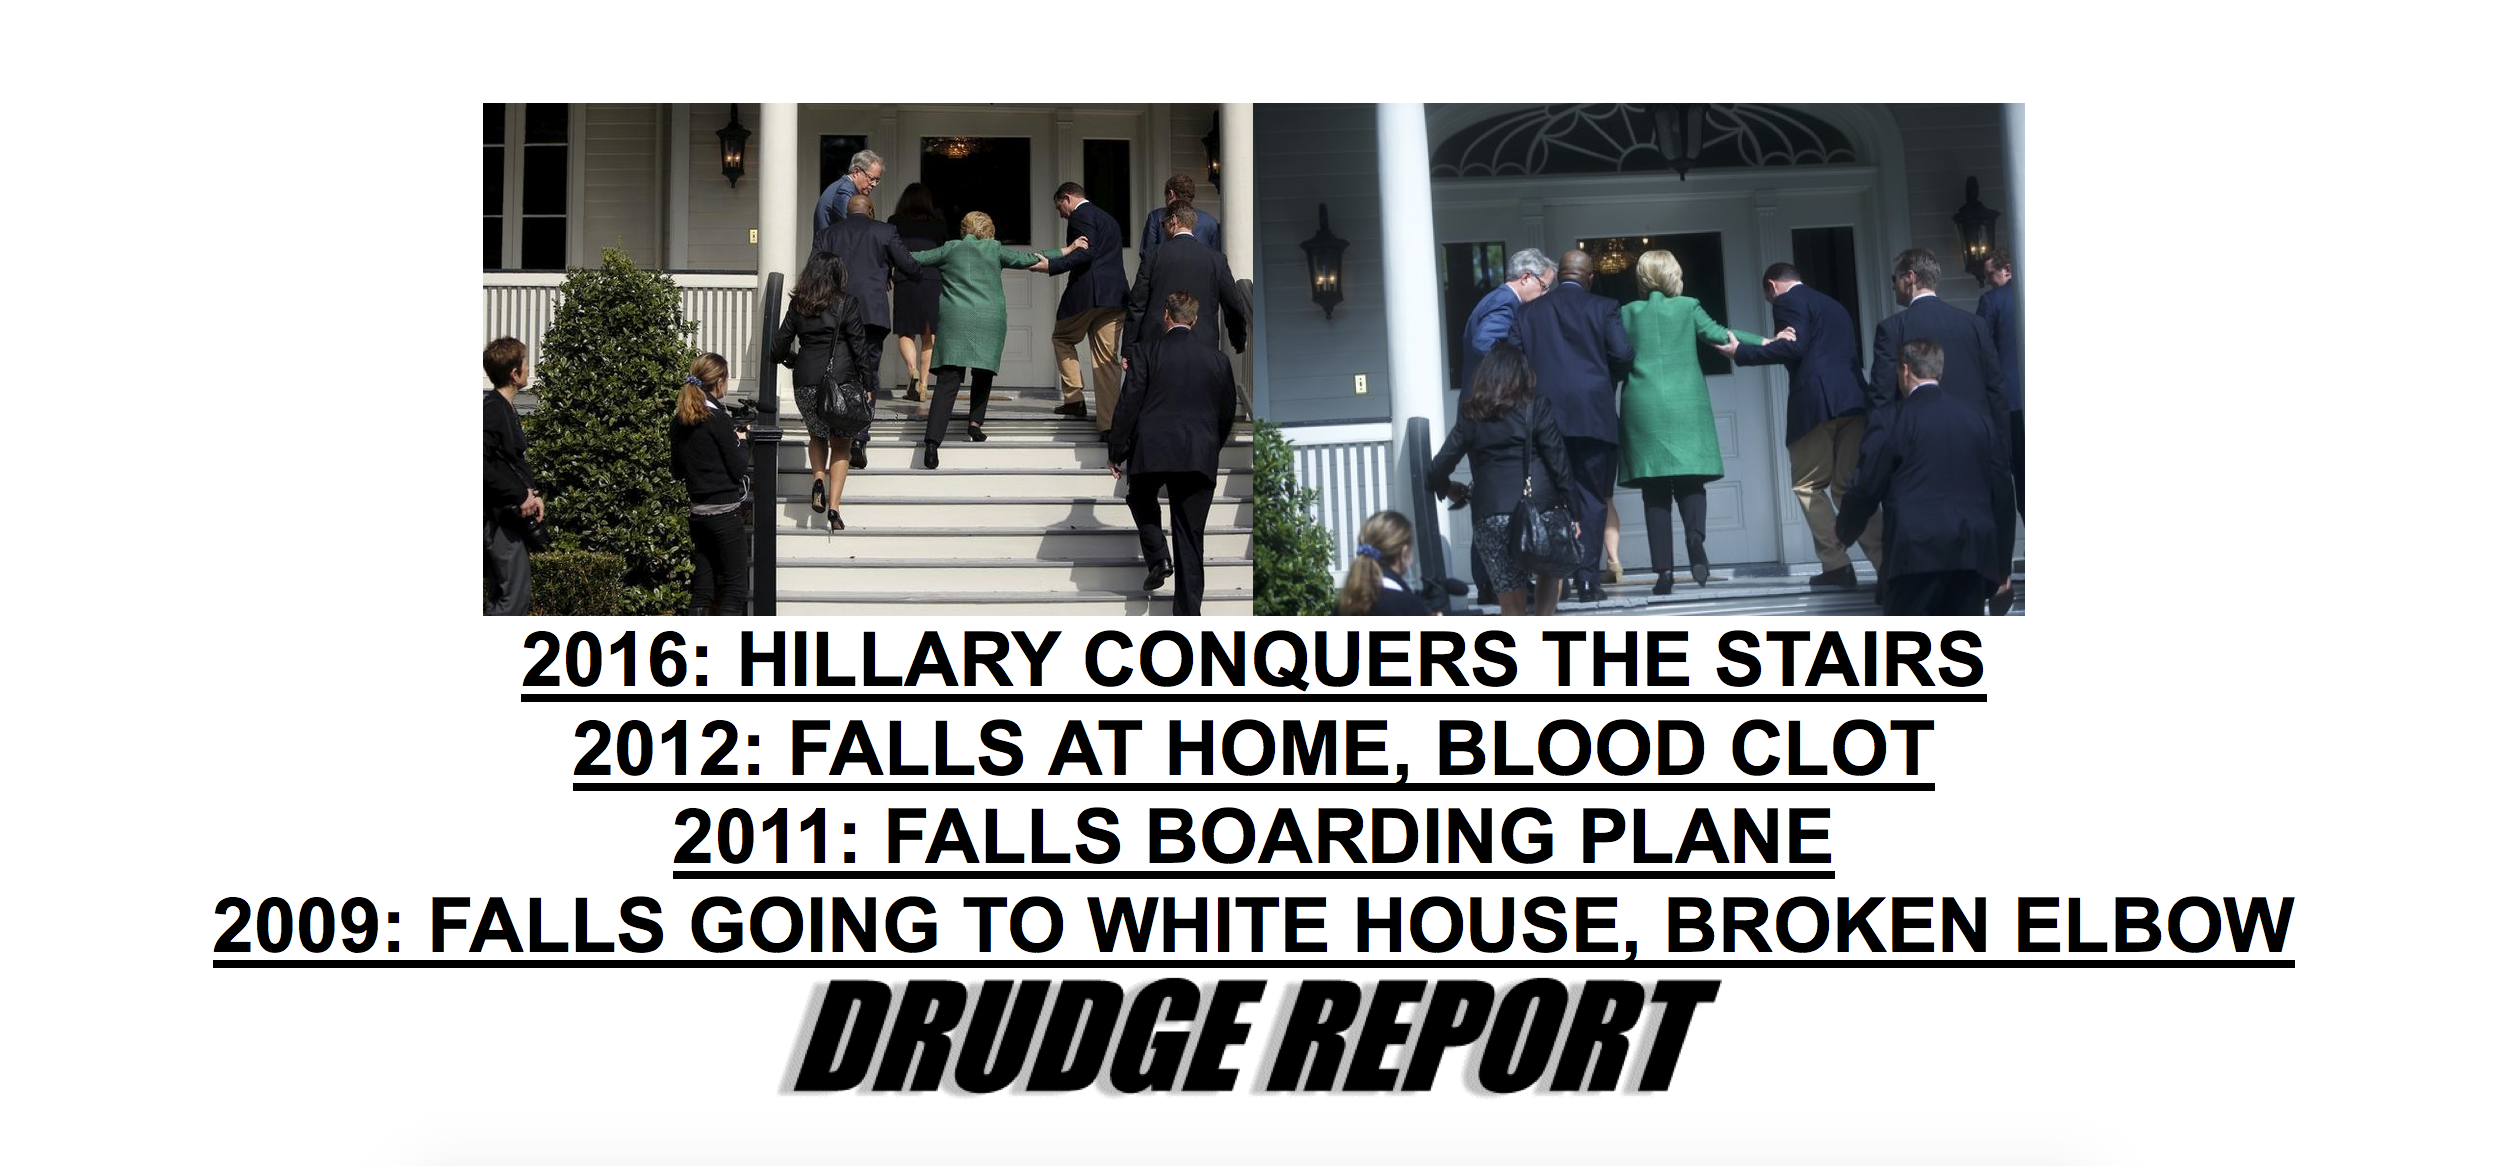 Hillary’s Health Decline: How Can She Be President if She Can Barely Climb a Few Stairs?